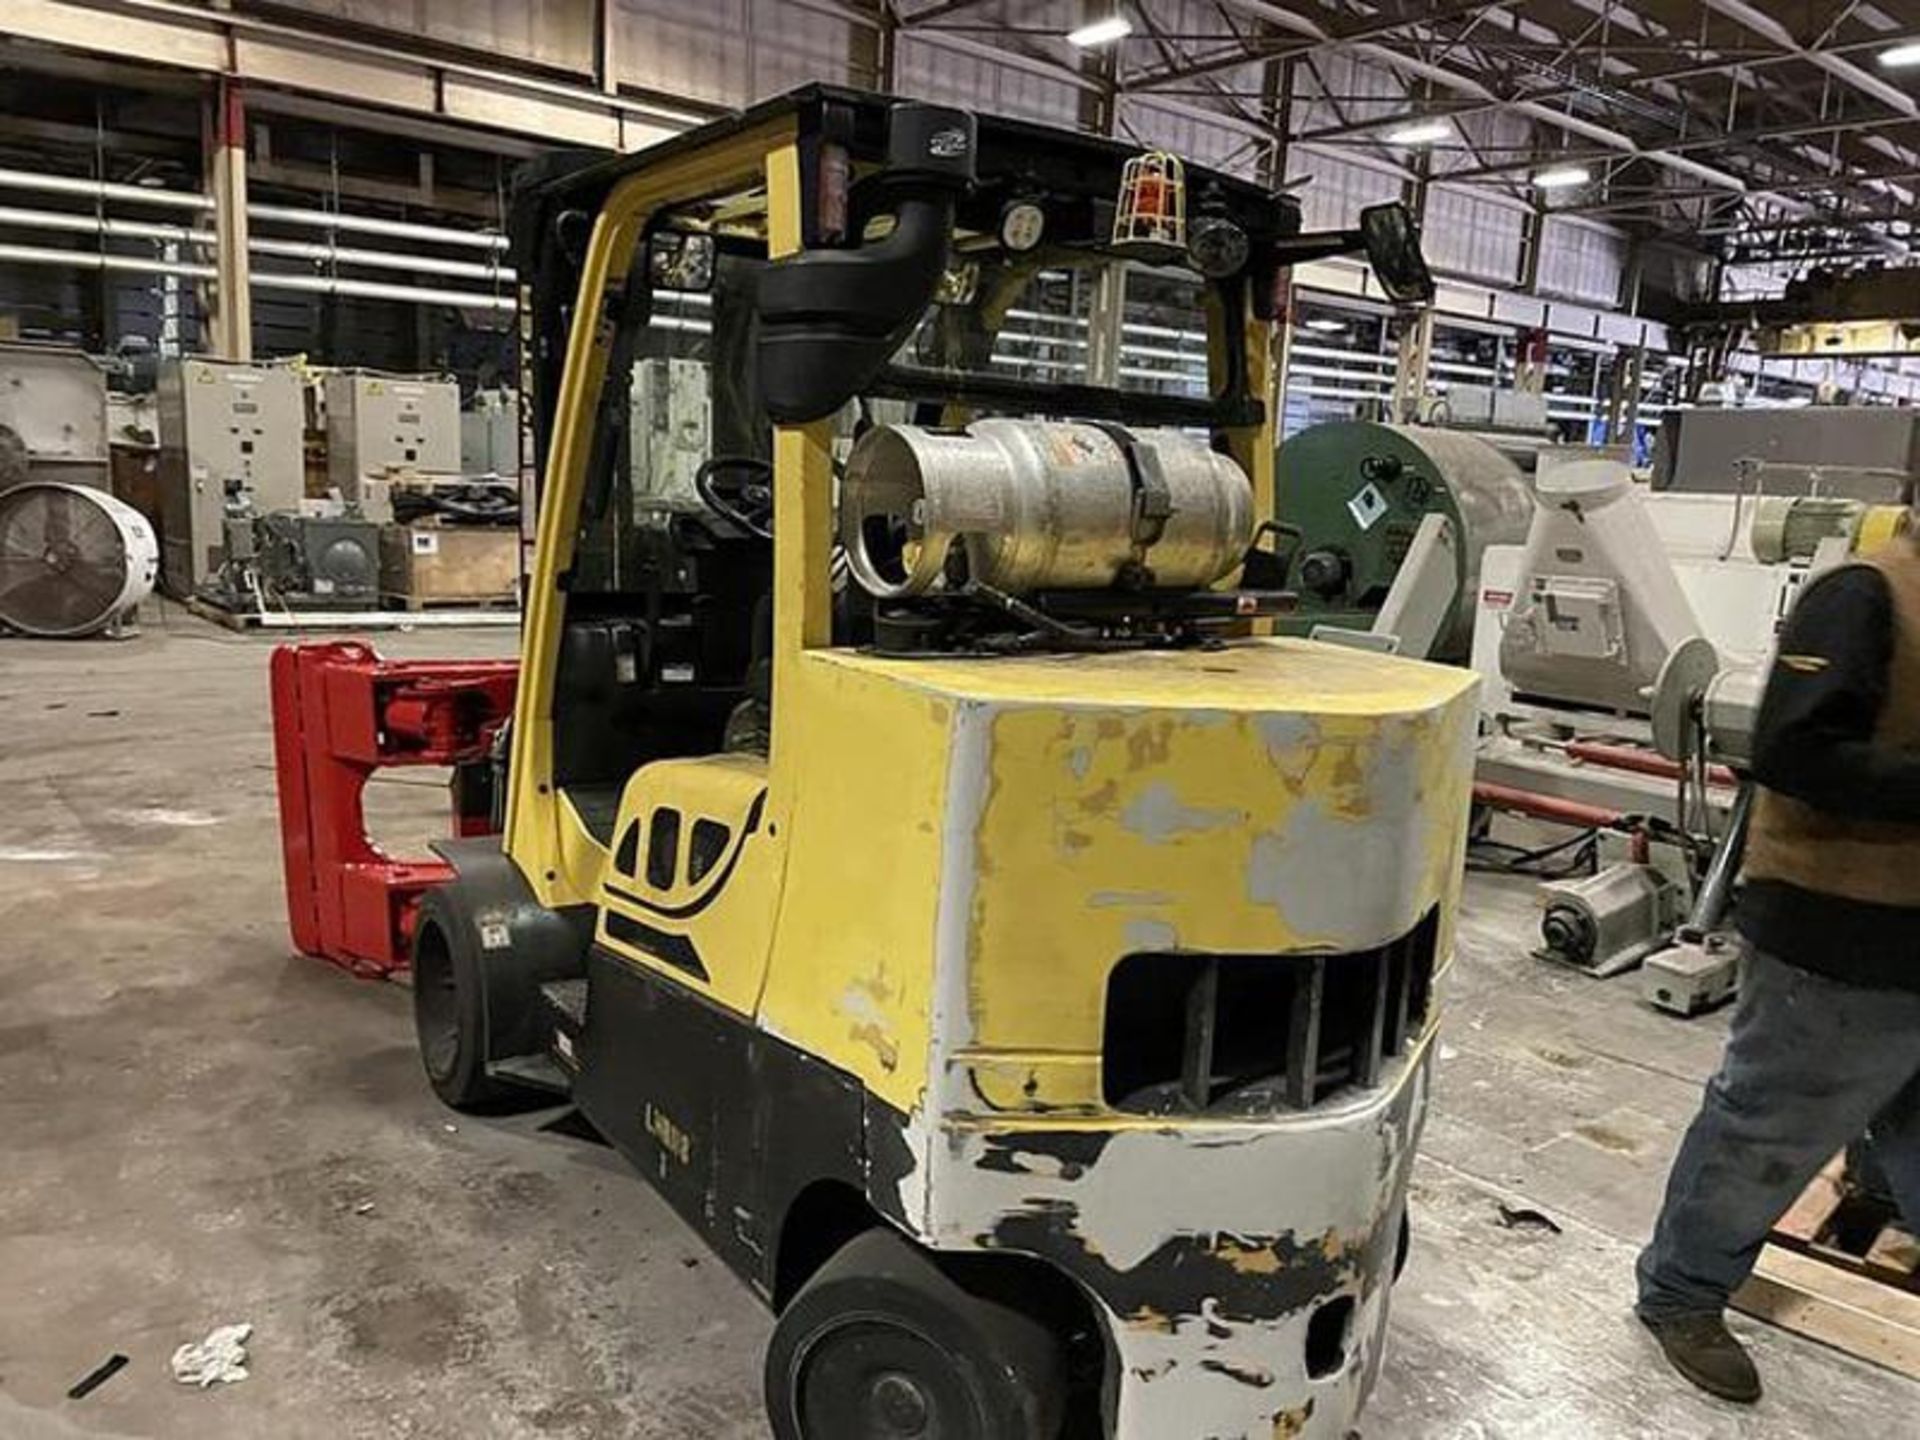 12,000 POUND HYSTER S120FTPRS FORKLIFT WITH BOLZONI PAPER ROLL CLAMP TRIPLE STAGE MAST MFG. 2018 - Image 2 of 8